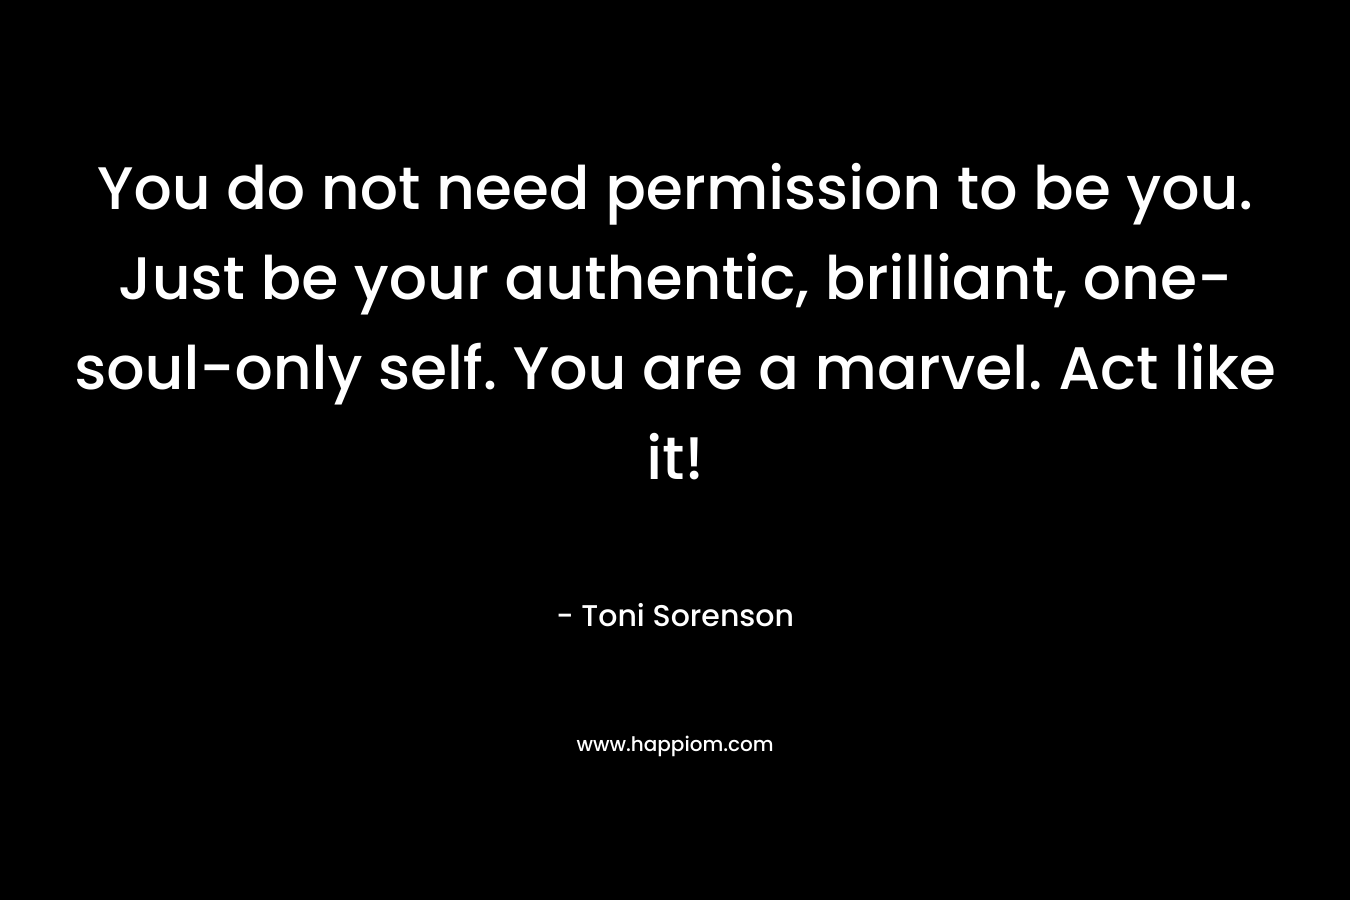 You do not need permission to be you. Just be your authentic, brilliant, one-soul-only self. You are a marvel. Act like it! – Toni Sorenson